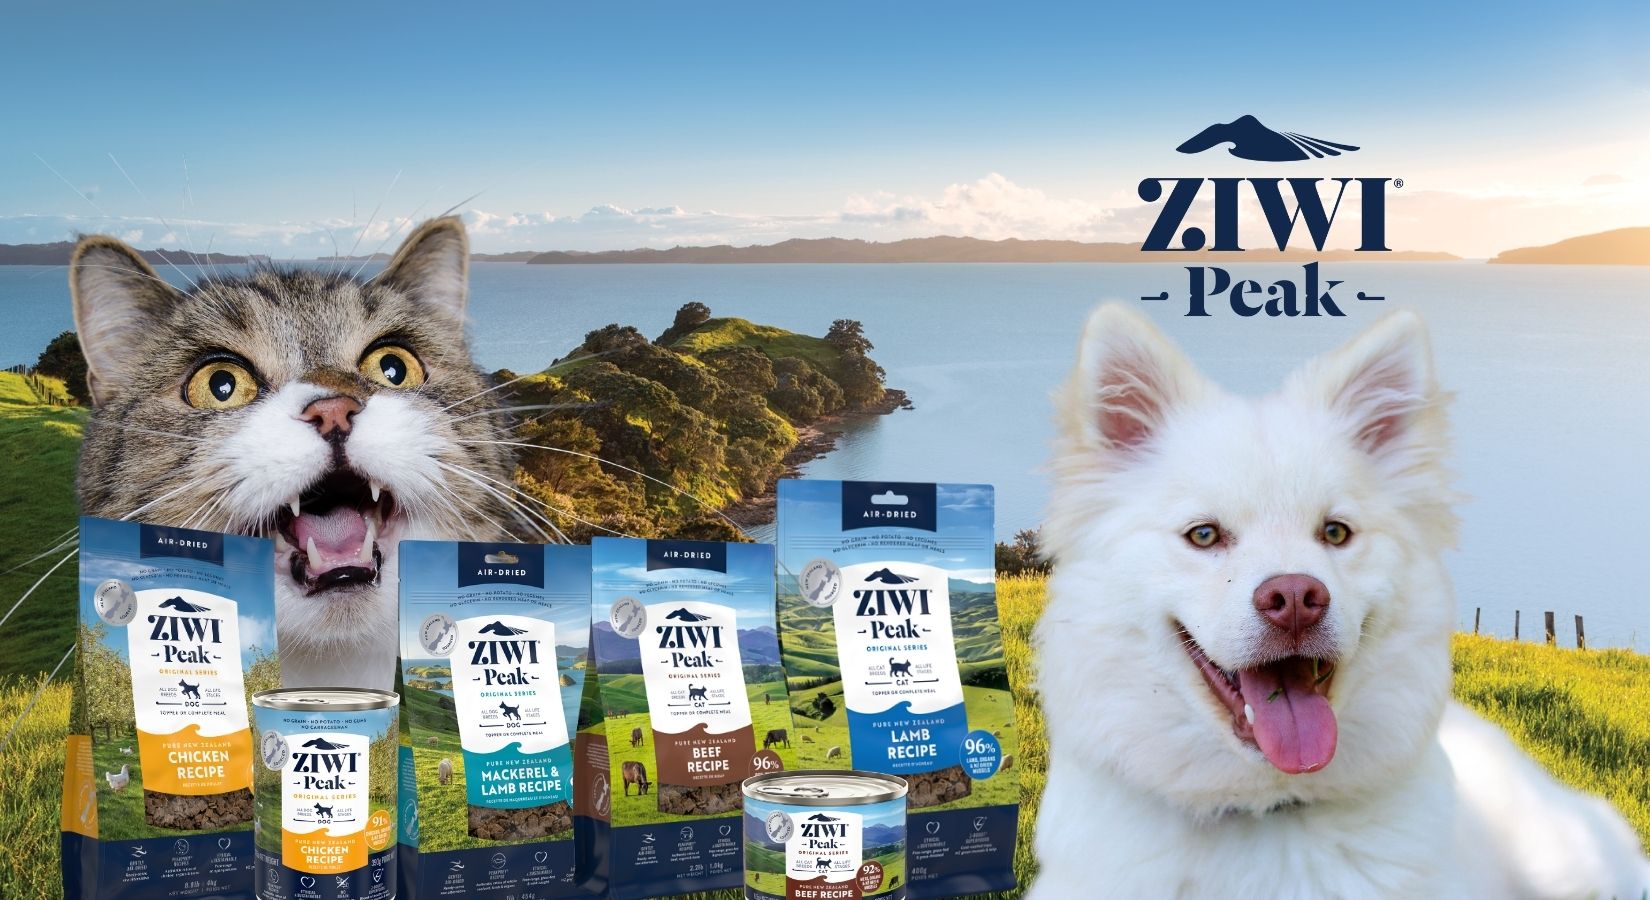 ZIWI Peak - New Zealand made, premium pet food for dogs and cats.